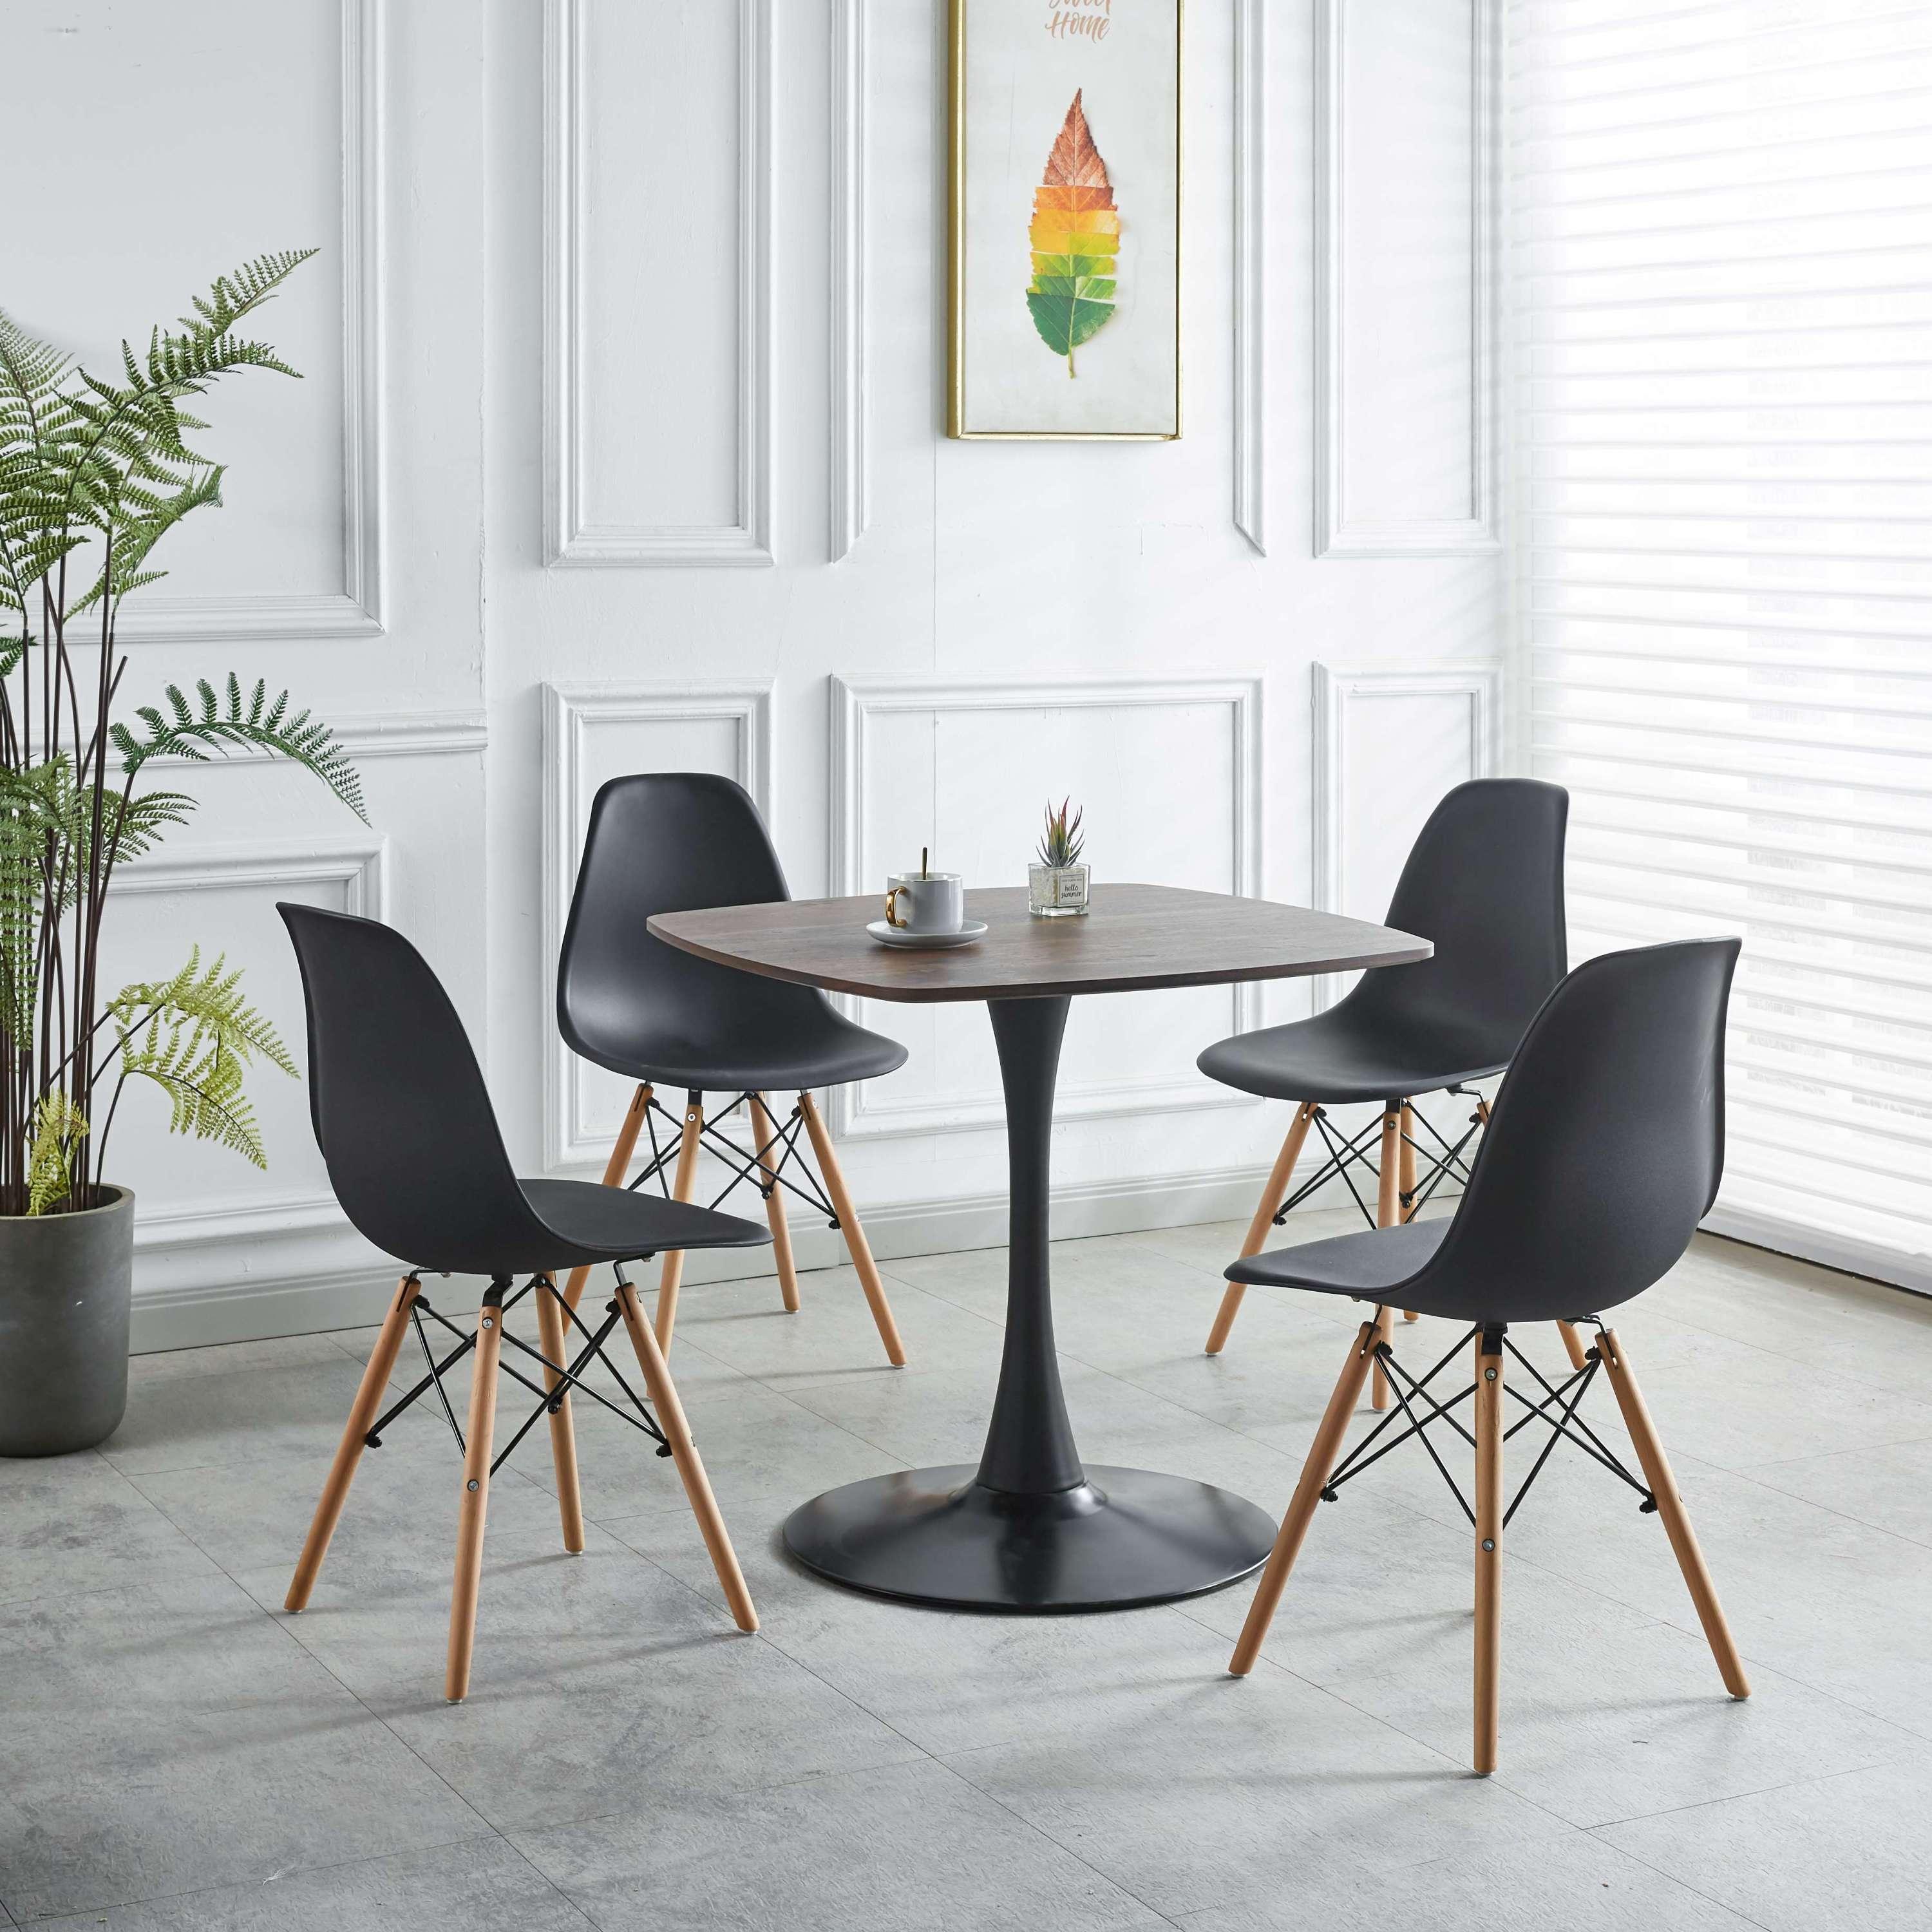 🆓🚛 5 Pcs Dining Set, 1 Square Mid-Century Dining Table With Mdf Table Top, 4 Black Chairs